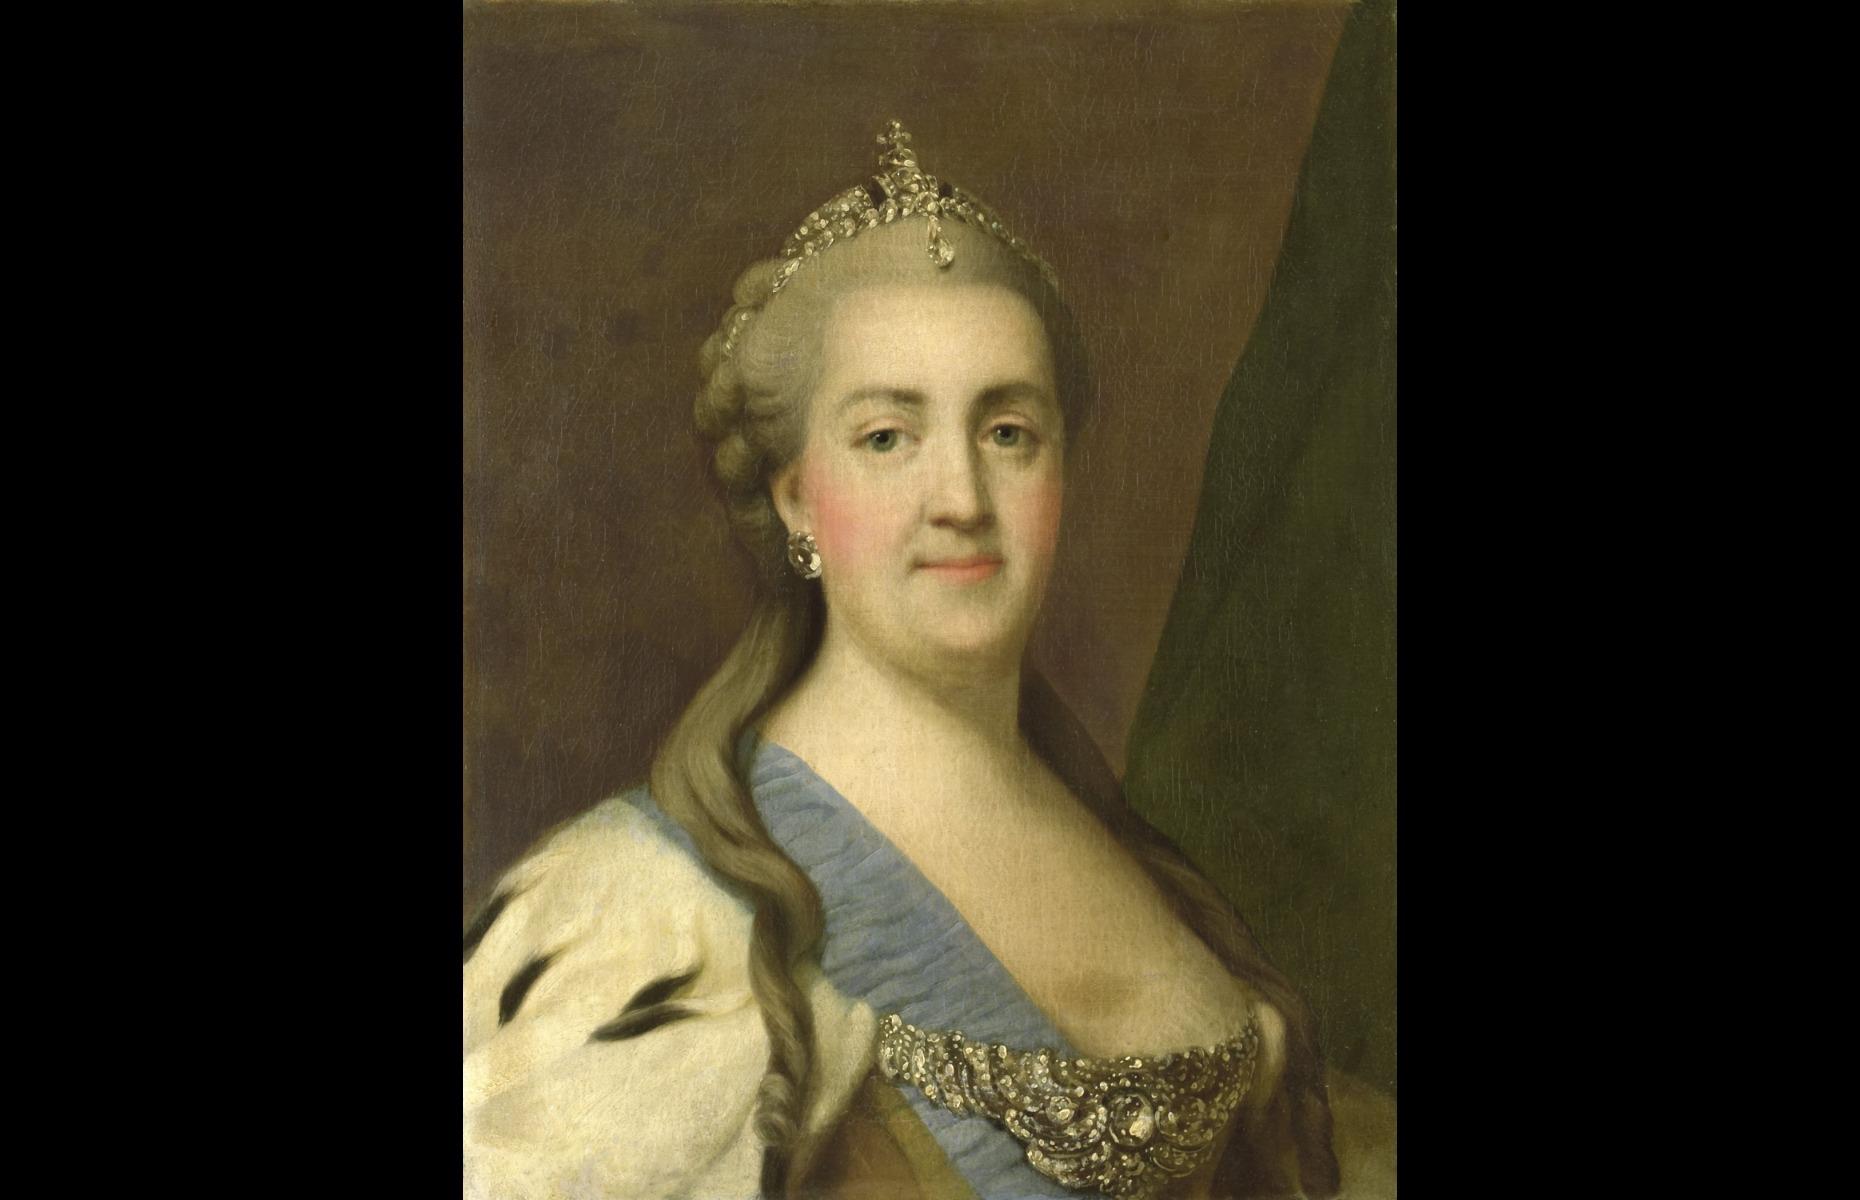 The reign of Catherine the Great